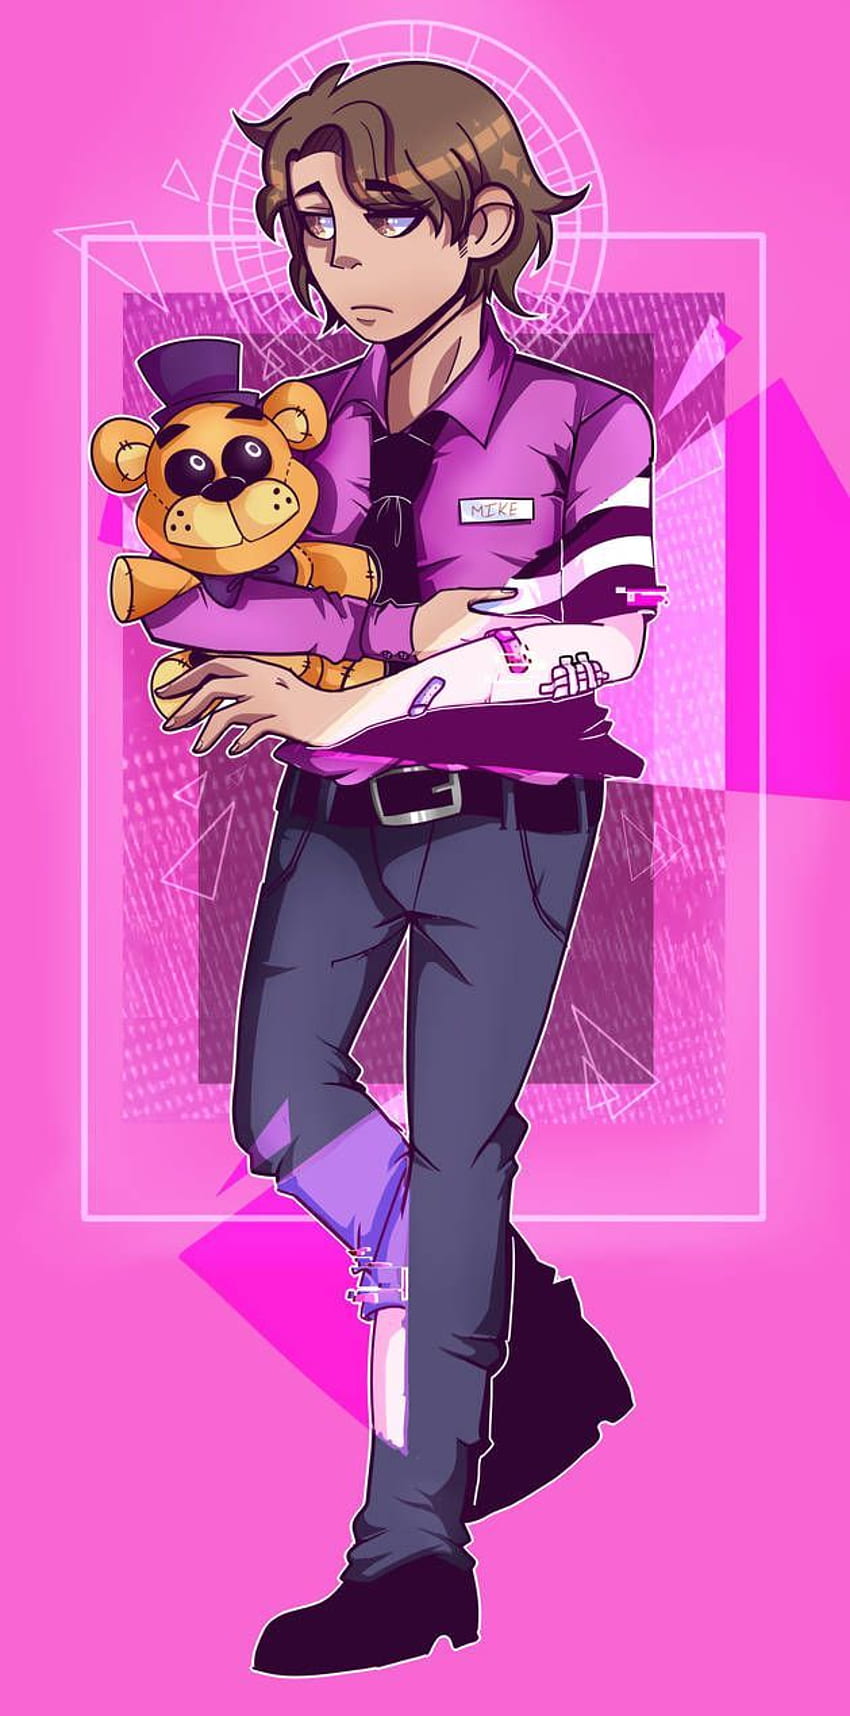 William Afton and Michael Afton by inaakey on Sketchers United